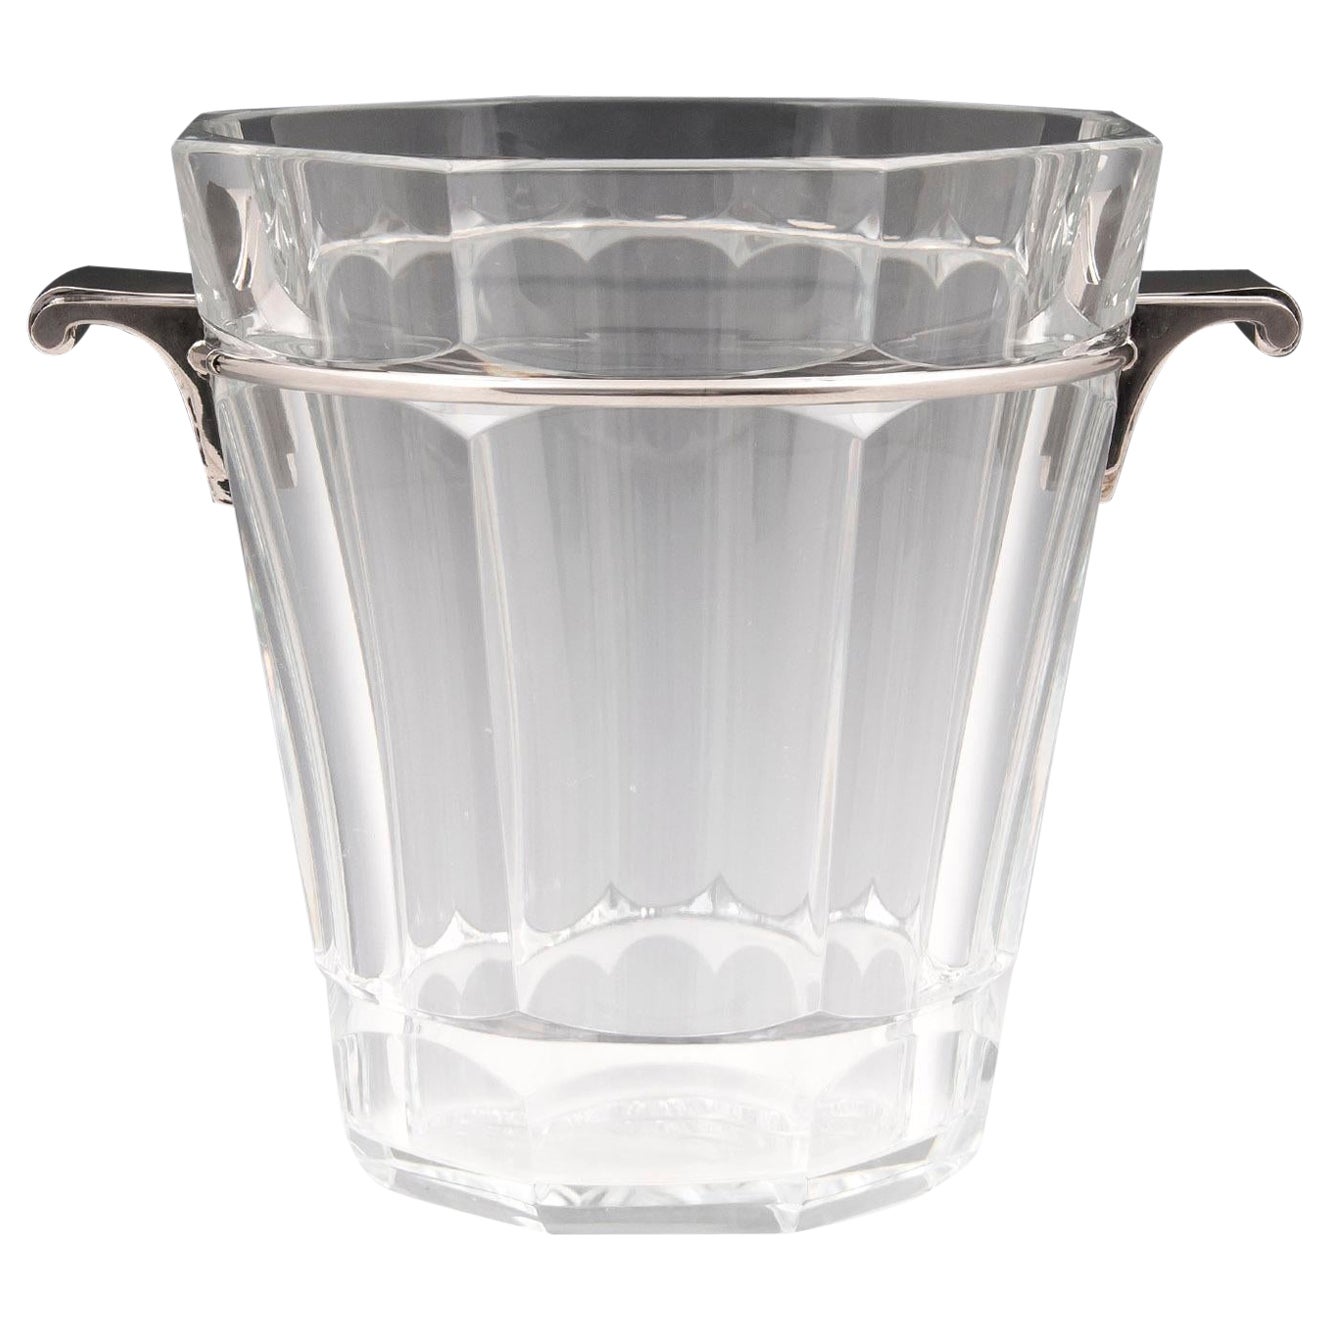 Champagne Ice Bucket Coller By Val Saint Lambert § A. Charlent im Angebot